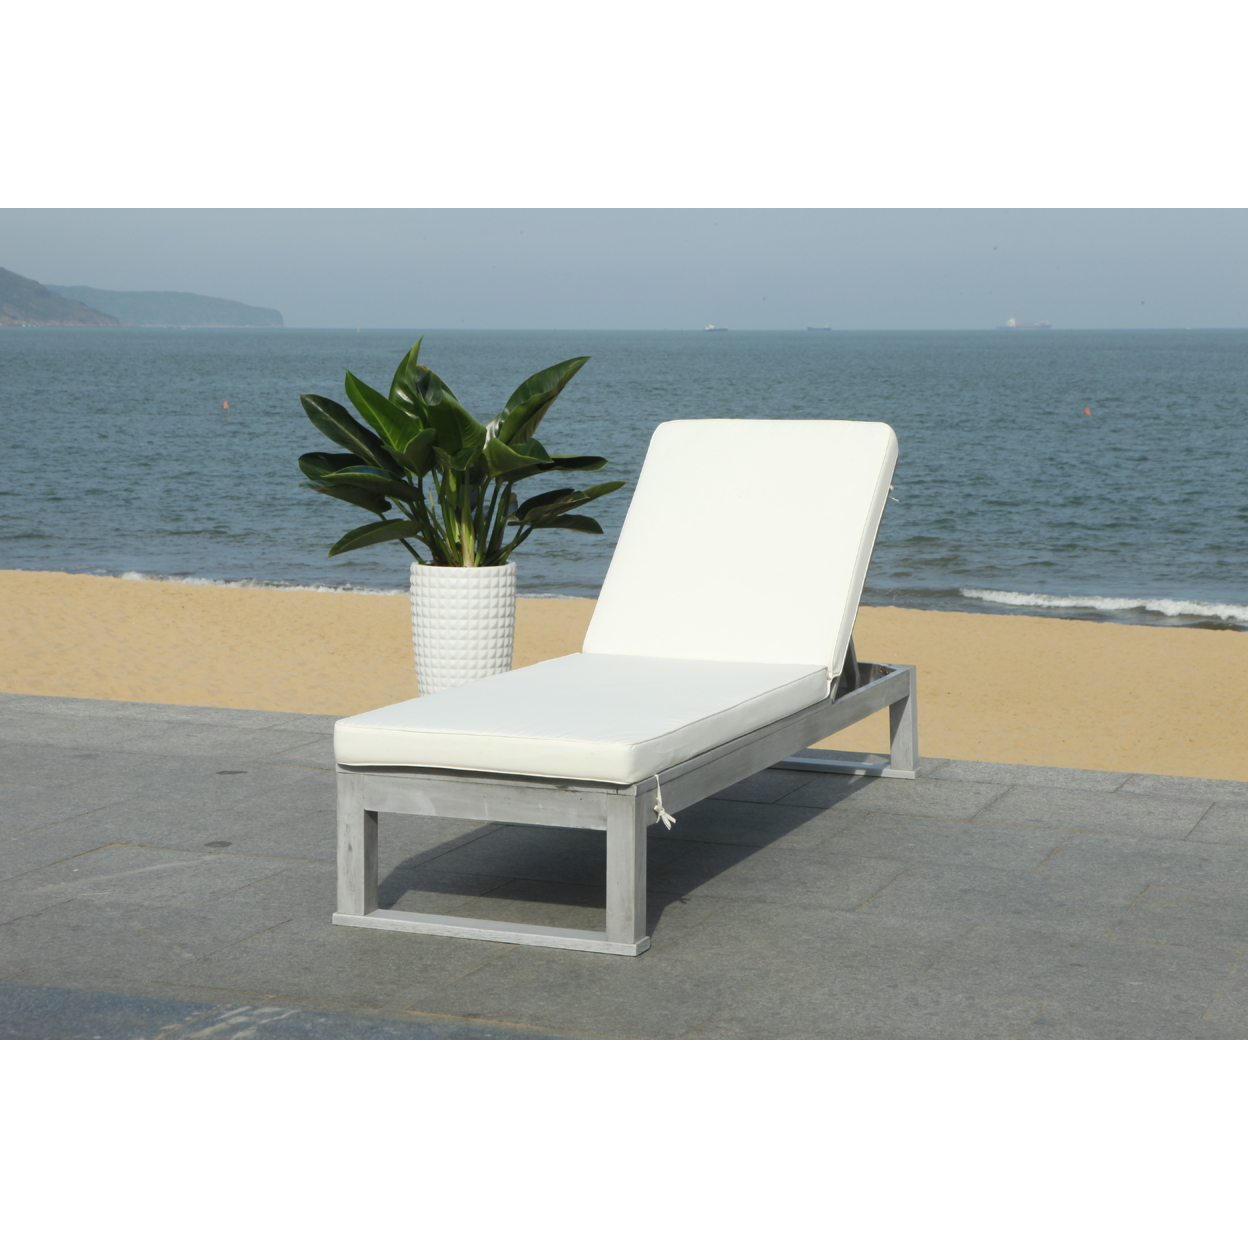 SAFAVIEH Outdoor Collection Solano Chaise Sunlounger Grey/Beige